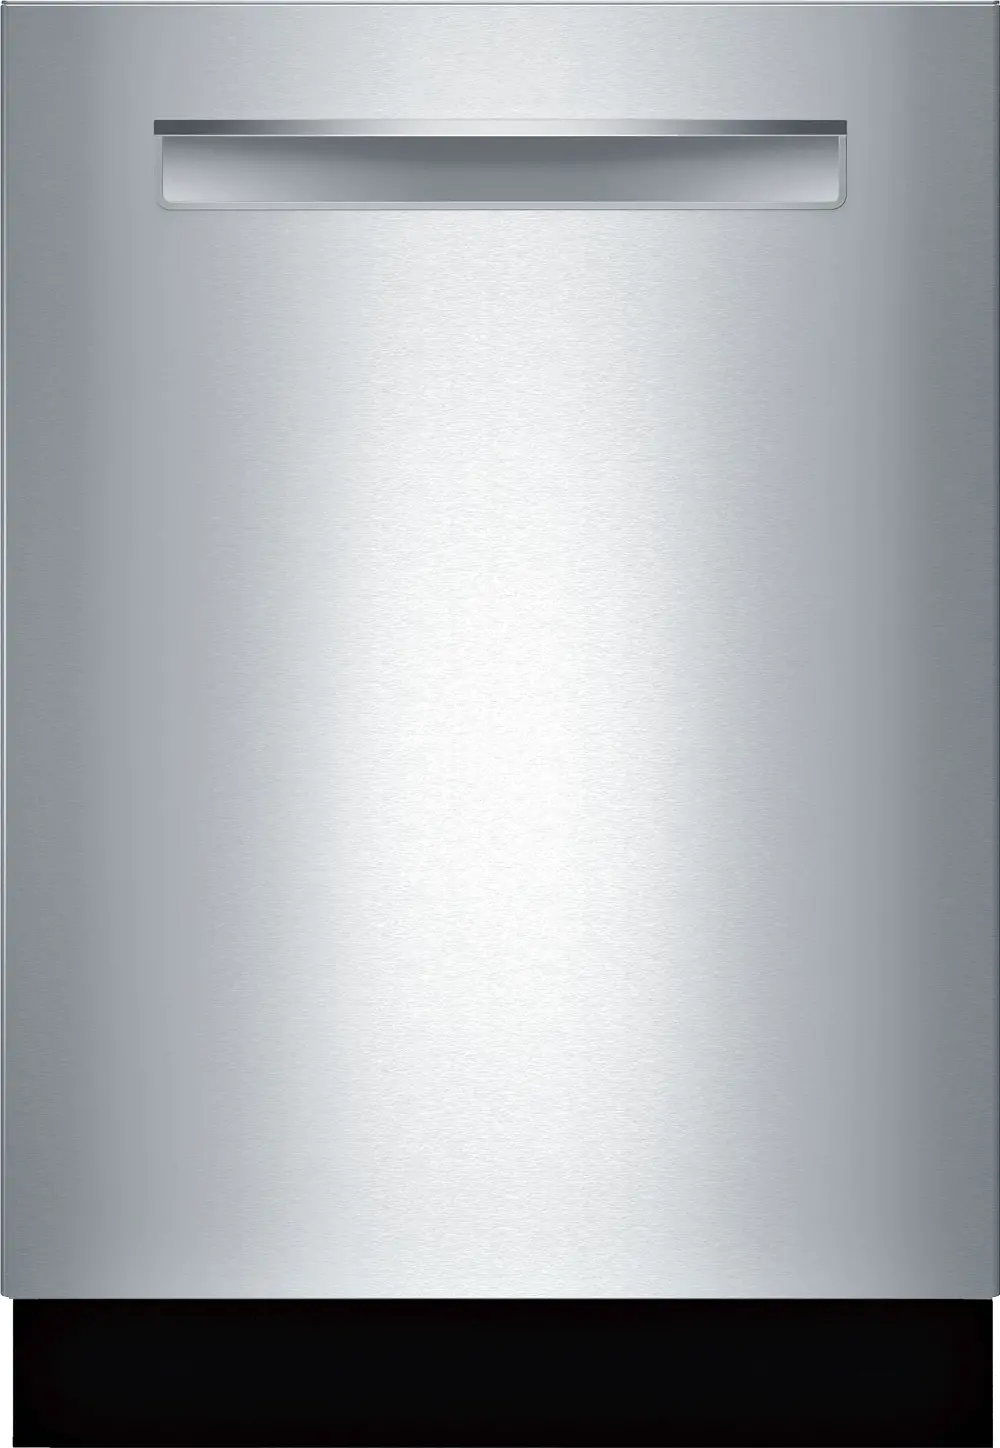 SHP87PZ55N Bosch Benchmark Dishwasher with CrystalDry - Stainless Steel-1